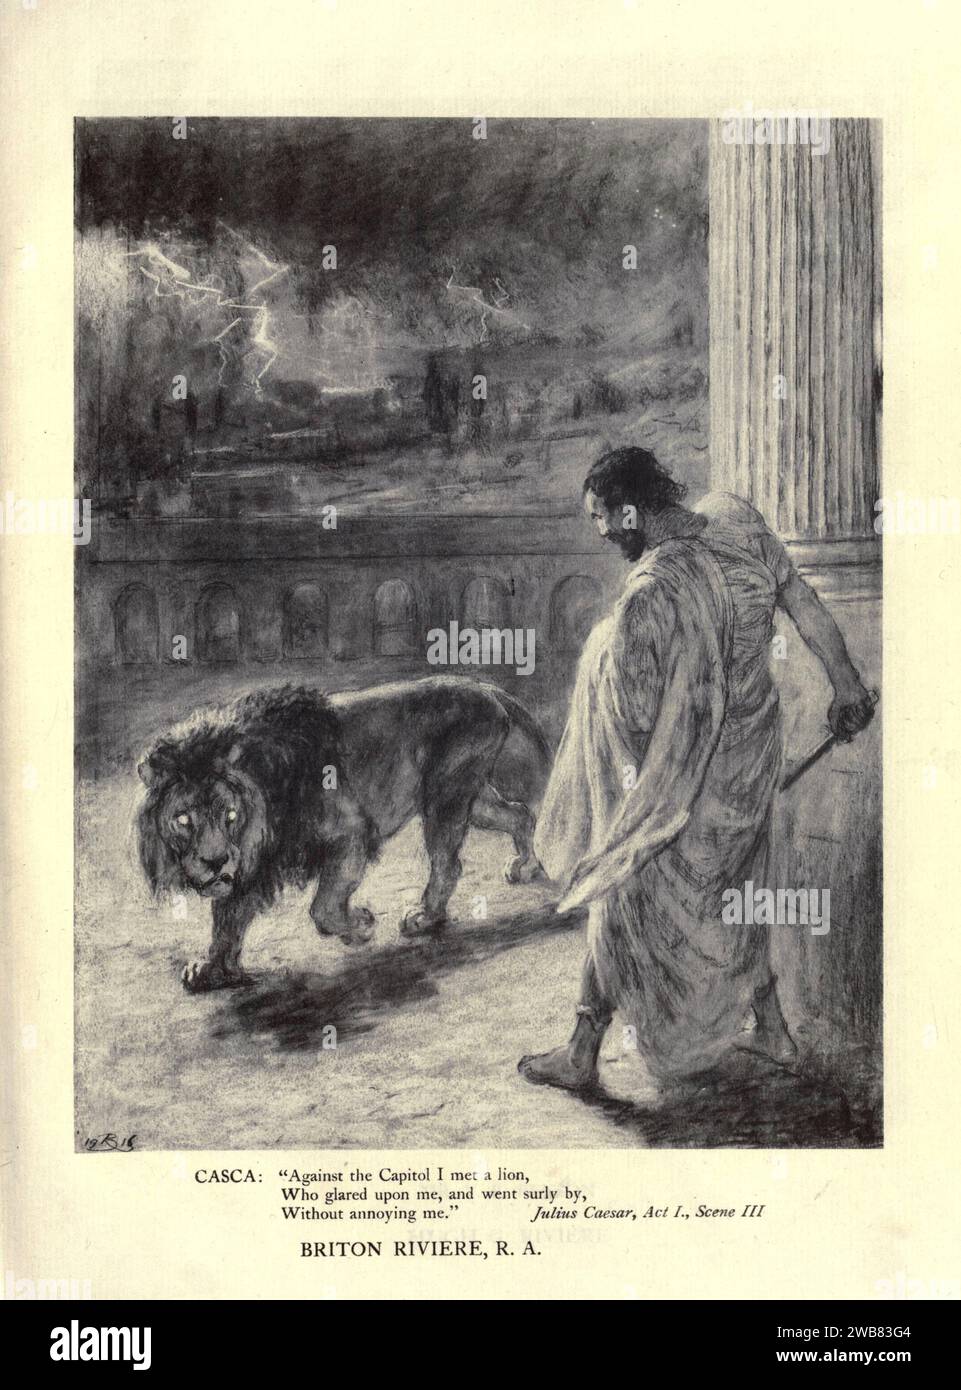 Casca: Against the Capitol I met a lion, Who glared upon me, and went surly by, Without annoying me.  Julius Caesar, Act i. Sc. iii. by BRITON RIVIERE from A Tribute to the genius of William Shakespeare; being the programme of a performance at Drury Lane Theatre on May 2, 1916, the tercentenary of his death; humbly offered by the players and their fellow-workers in the kindred arts of music & painting MACMILLAN AND CO., LIMITED ST. MARTIN'S STREET, LONDON 1916 Stock Photo